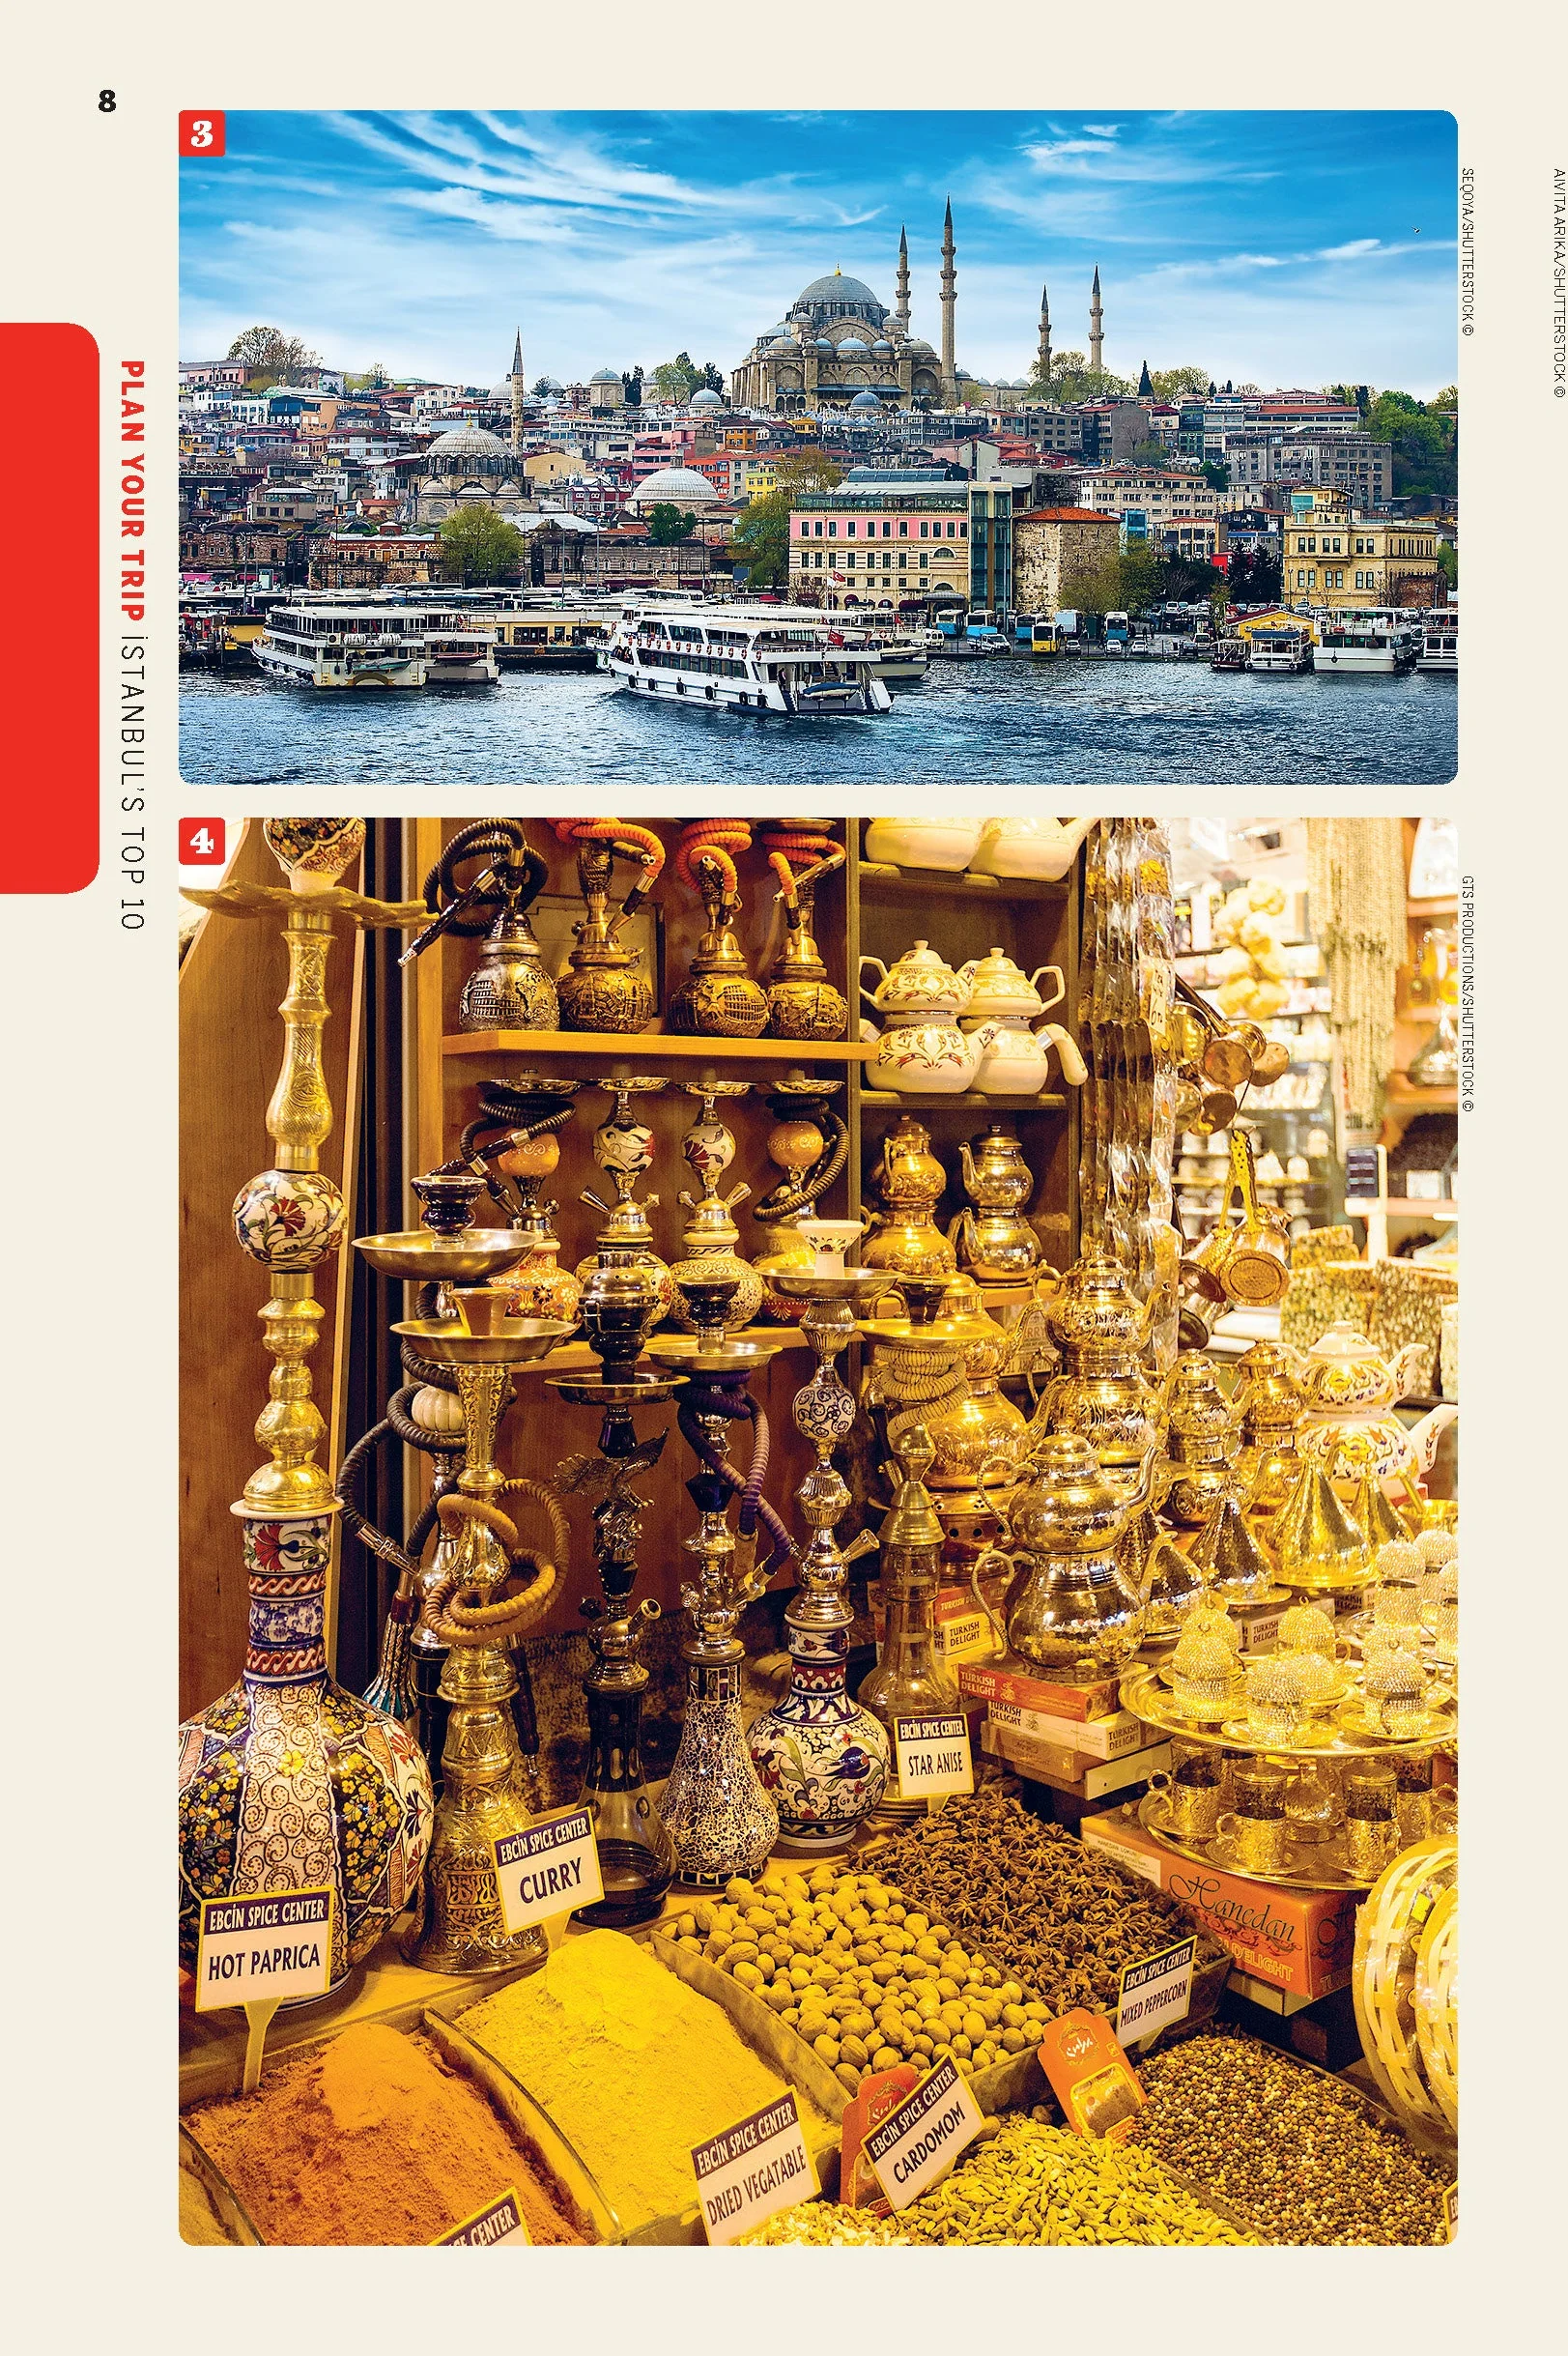 Istanbul Lonely Planet